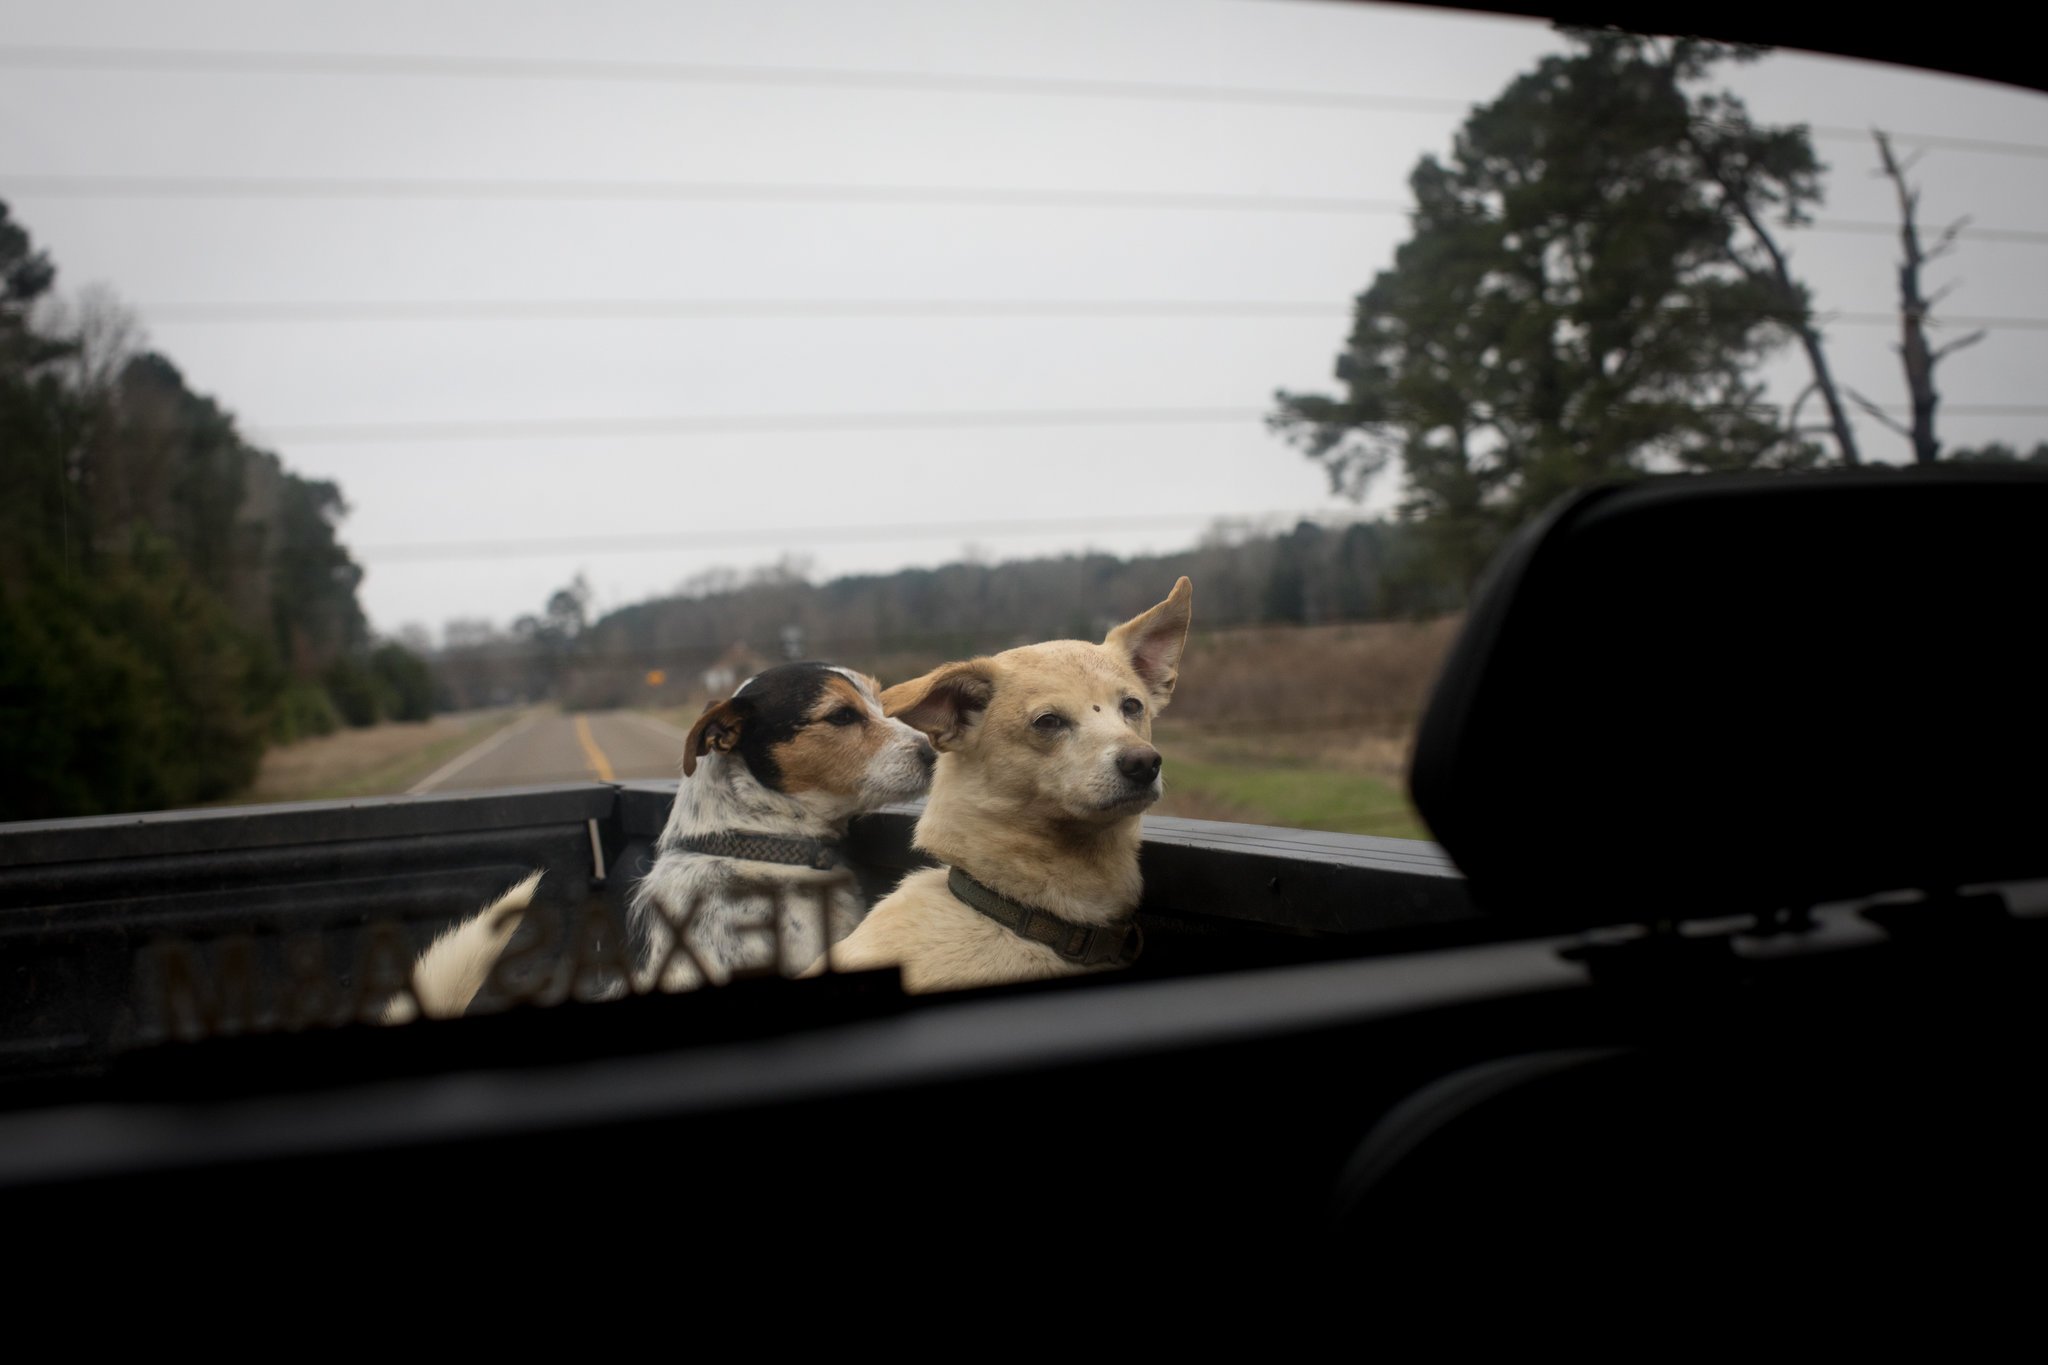 Two of Mr. Grant’s critter dogs, Acer and Sonny, travel in the back of the truck.